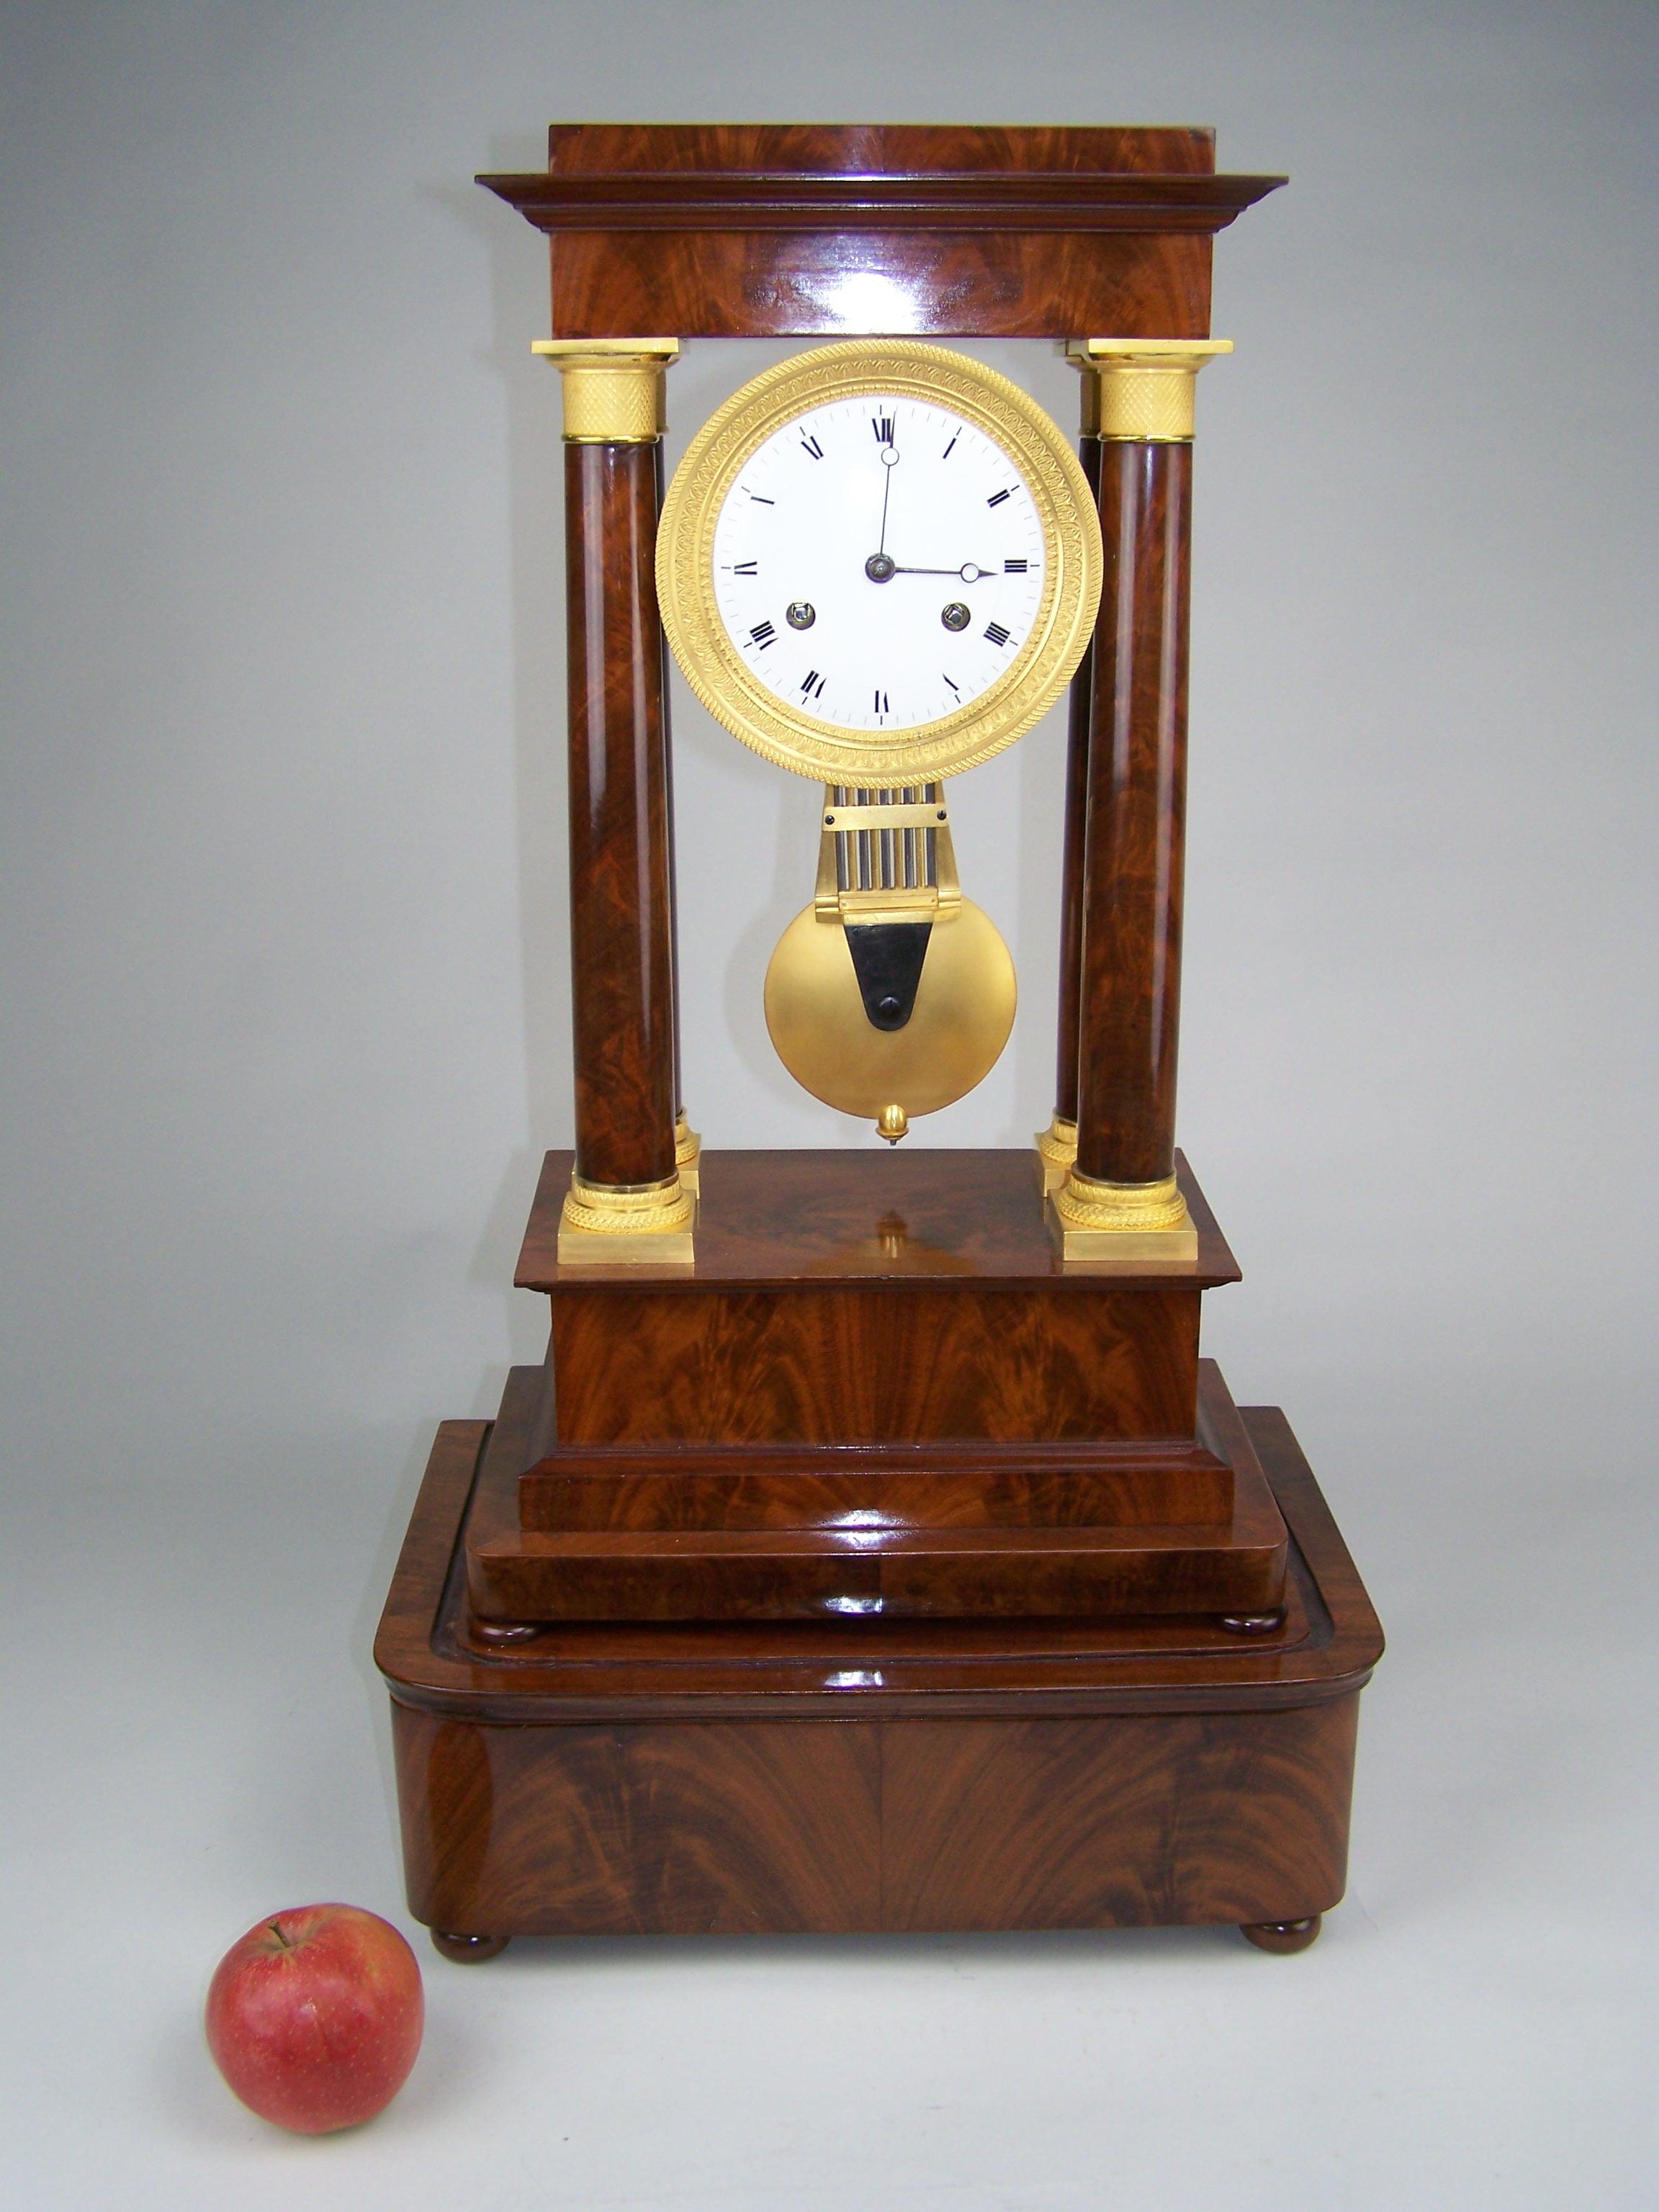 Musical Clock with pin wheel ecapement and fusee wound musical mechanism For Sale 9